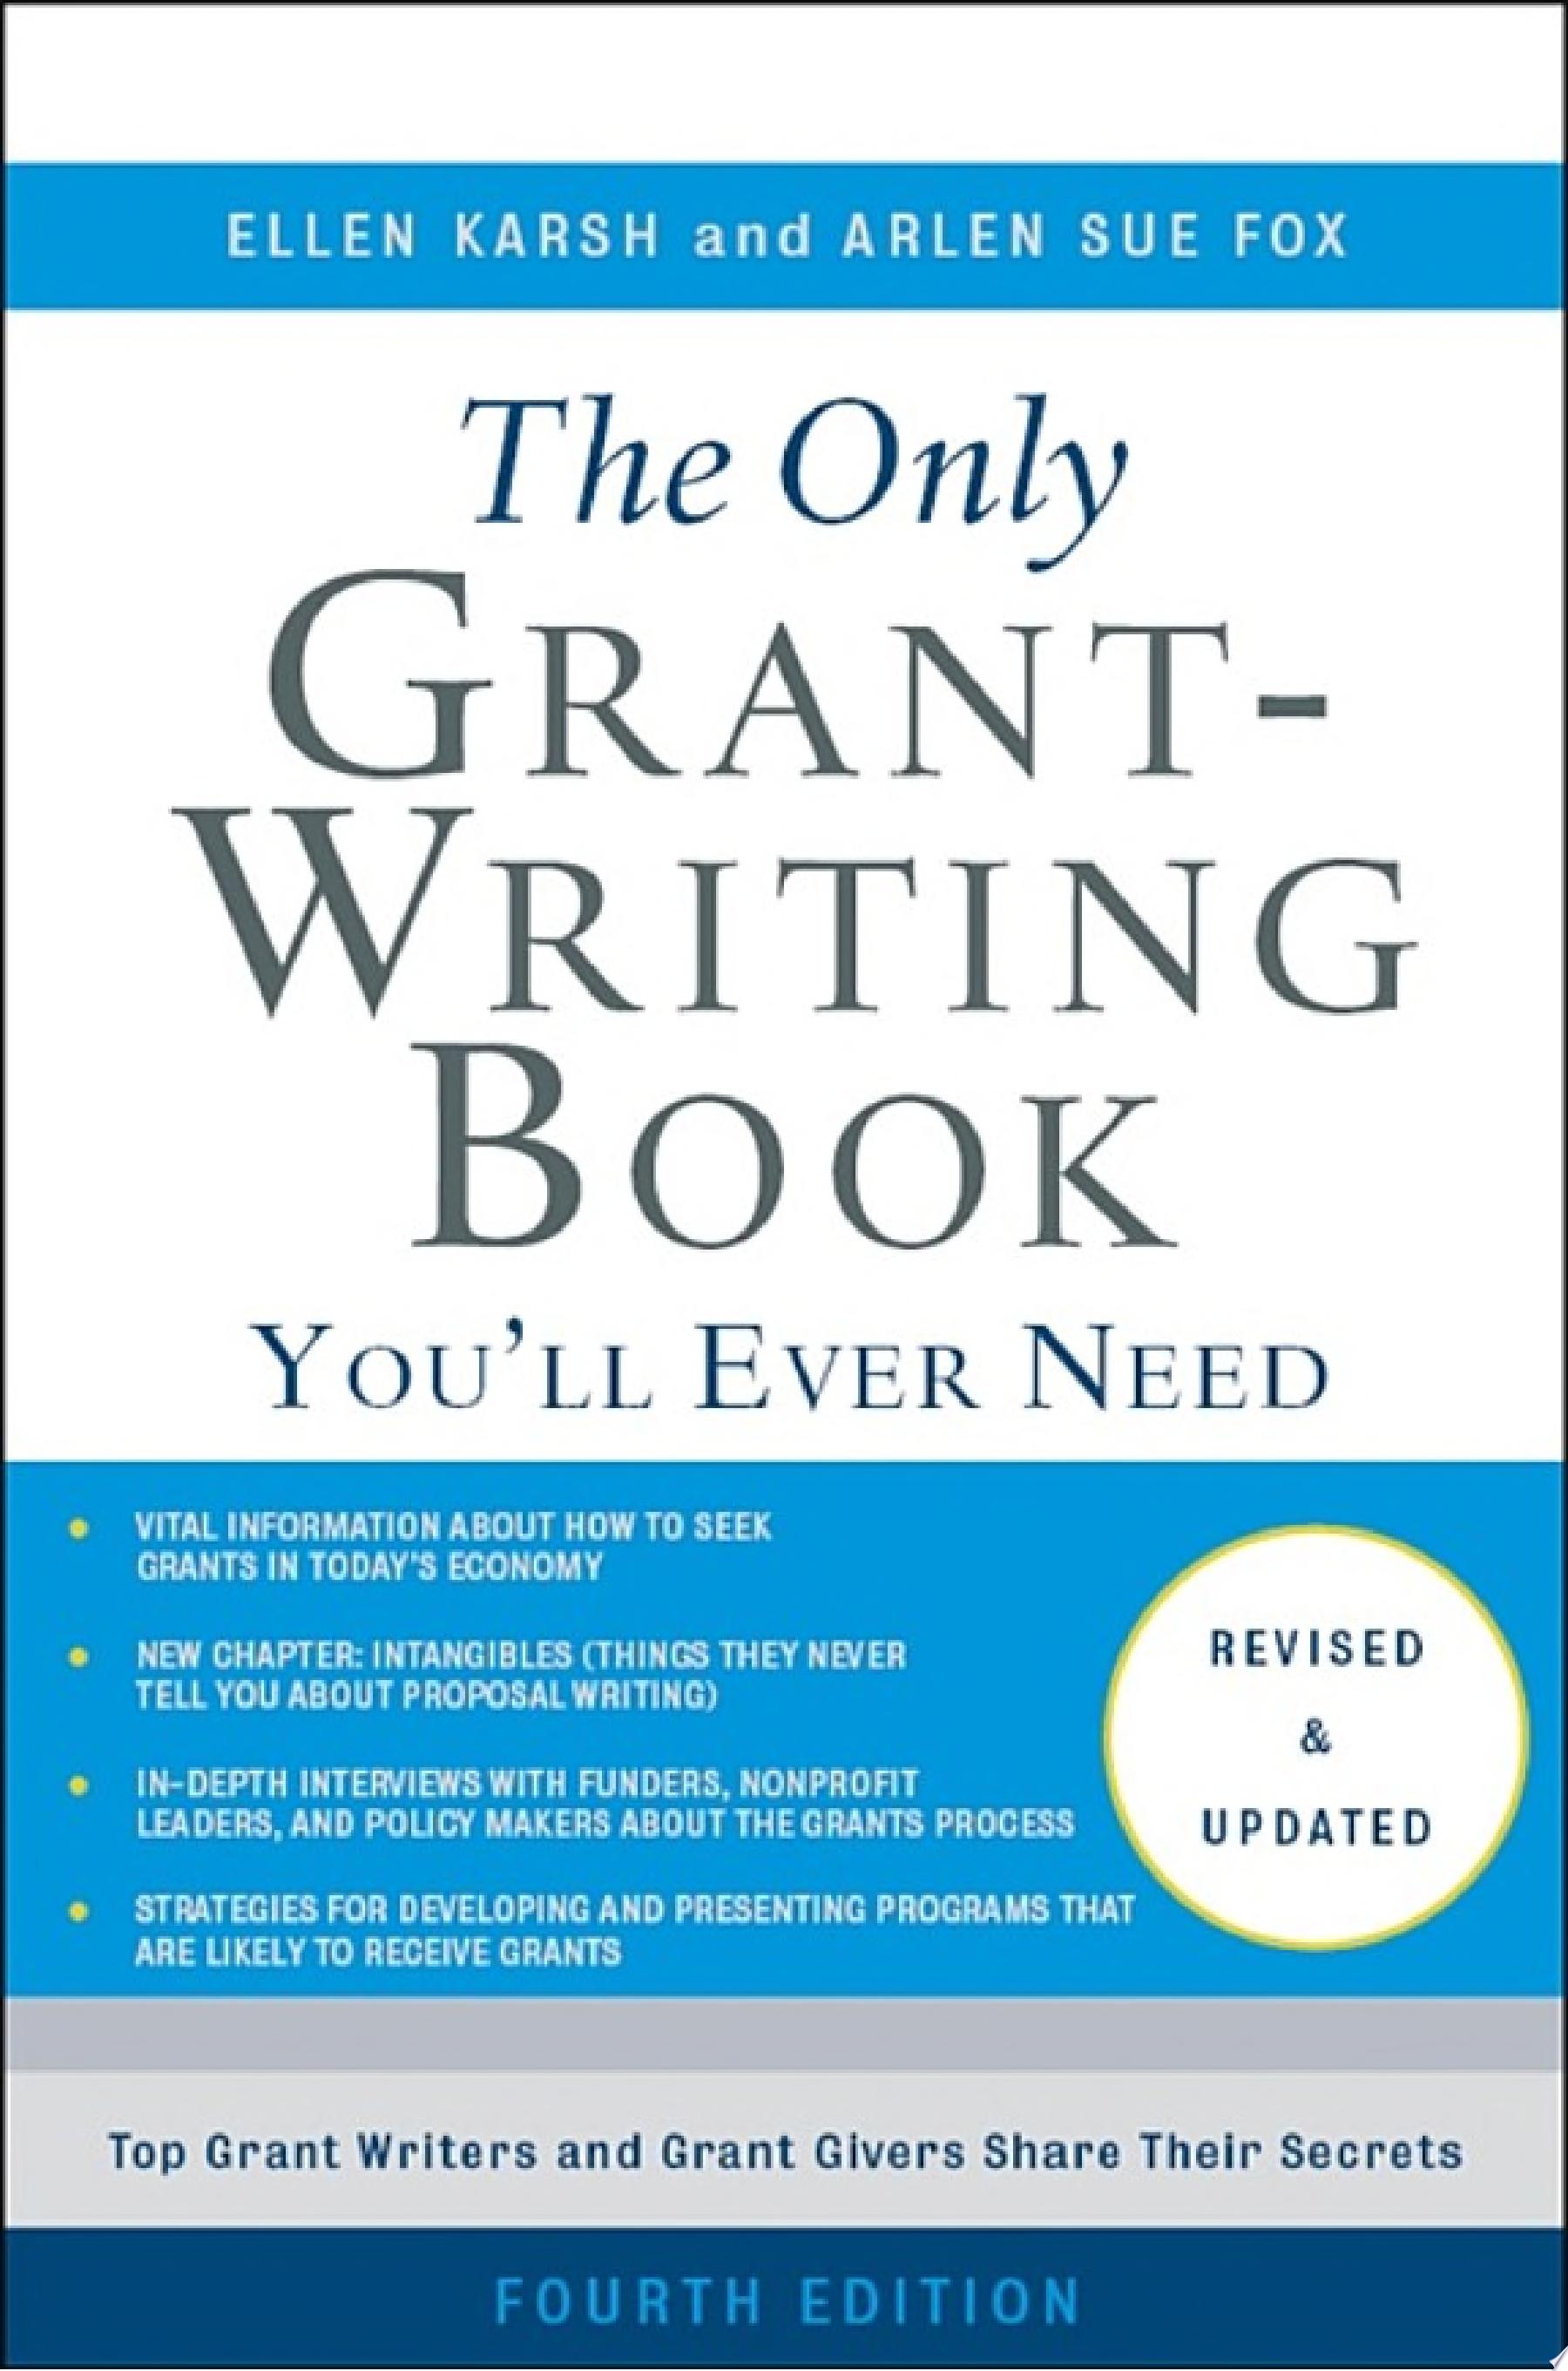 Image for "The Only Grant-Writing Book You'll Ever Need"